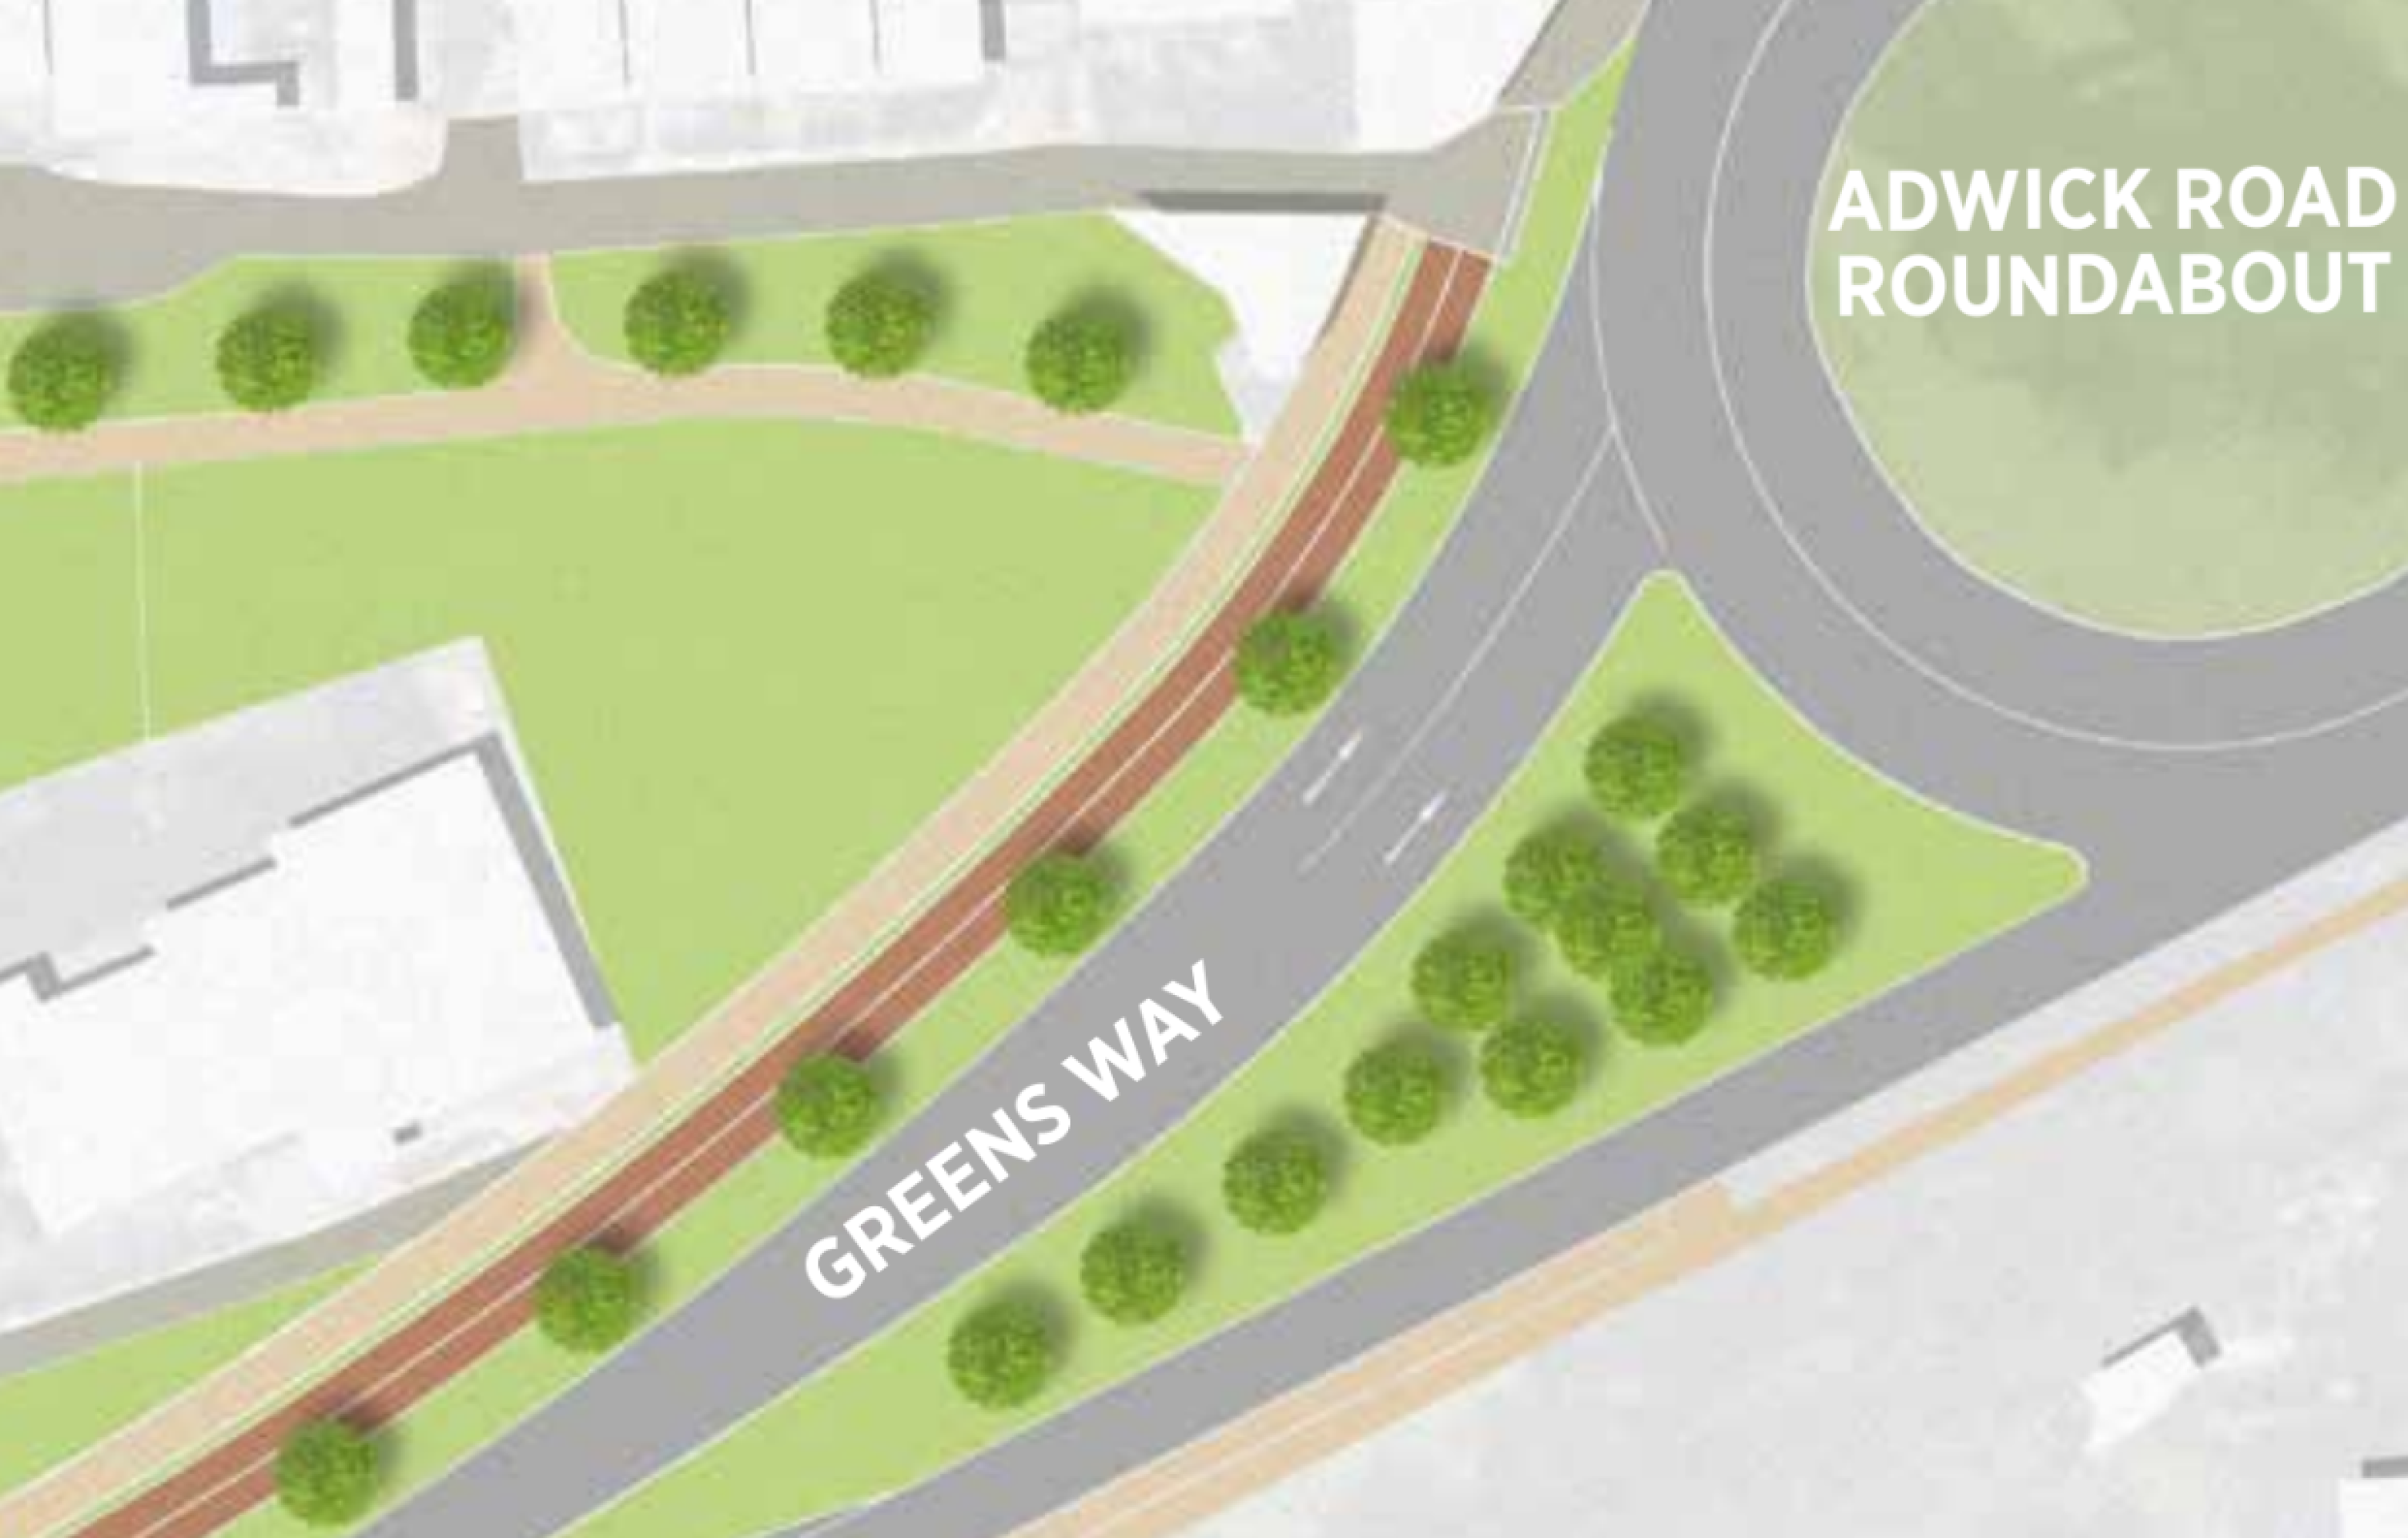 Eastern end of Greens Way, approach to Adwick Road Roundabout